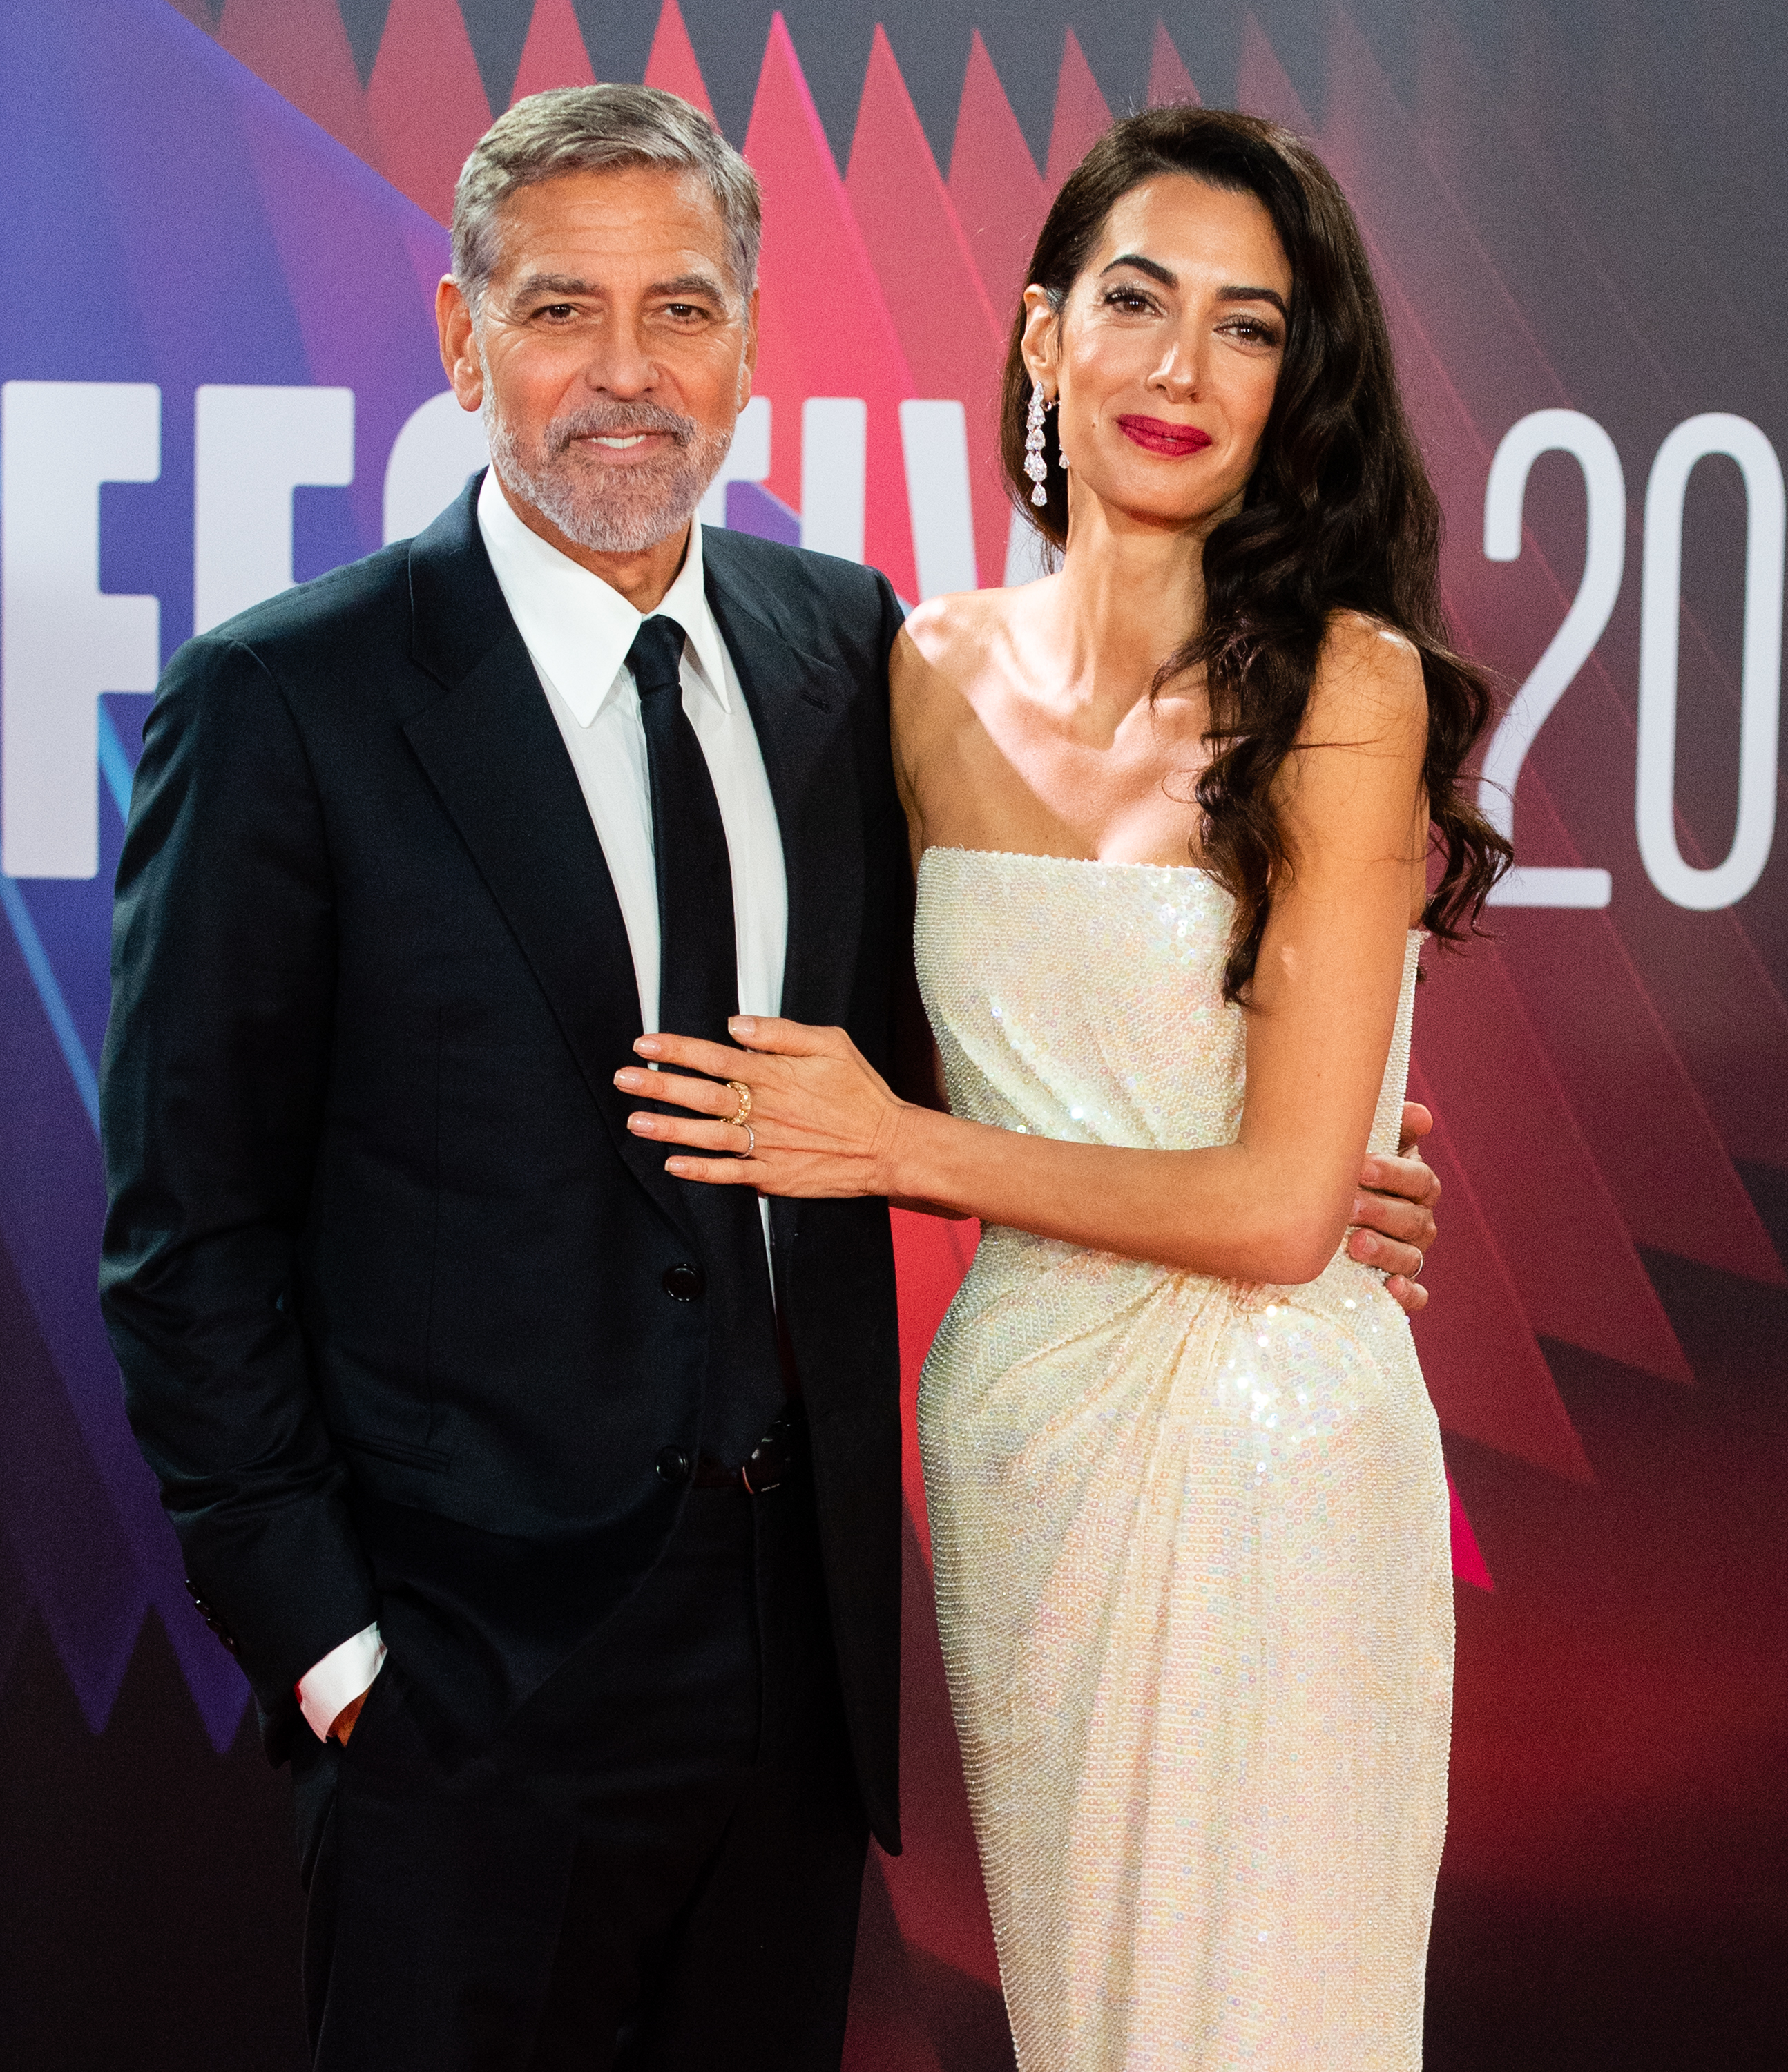 George Clooney and Amal Clooney in London, England on October 10, 2021 | Source: Getty Images